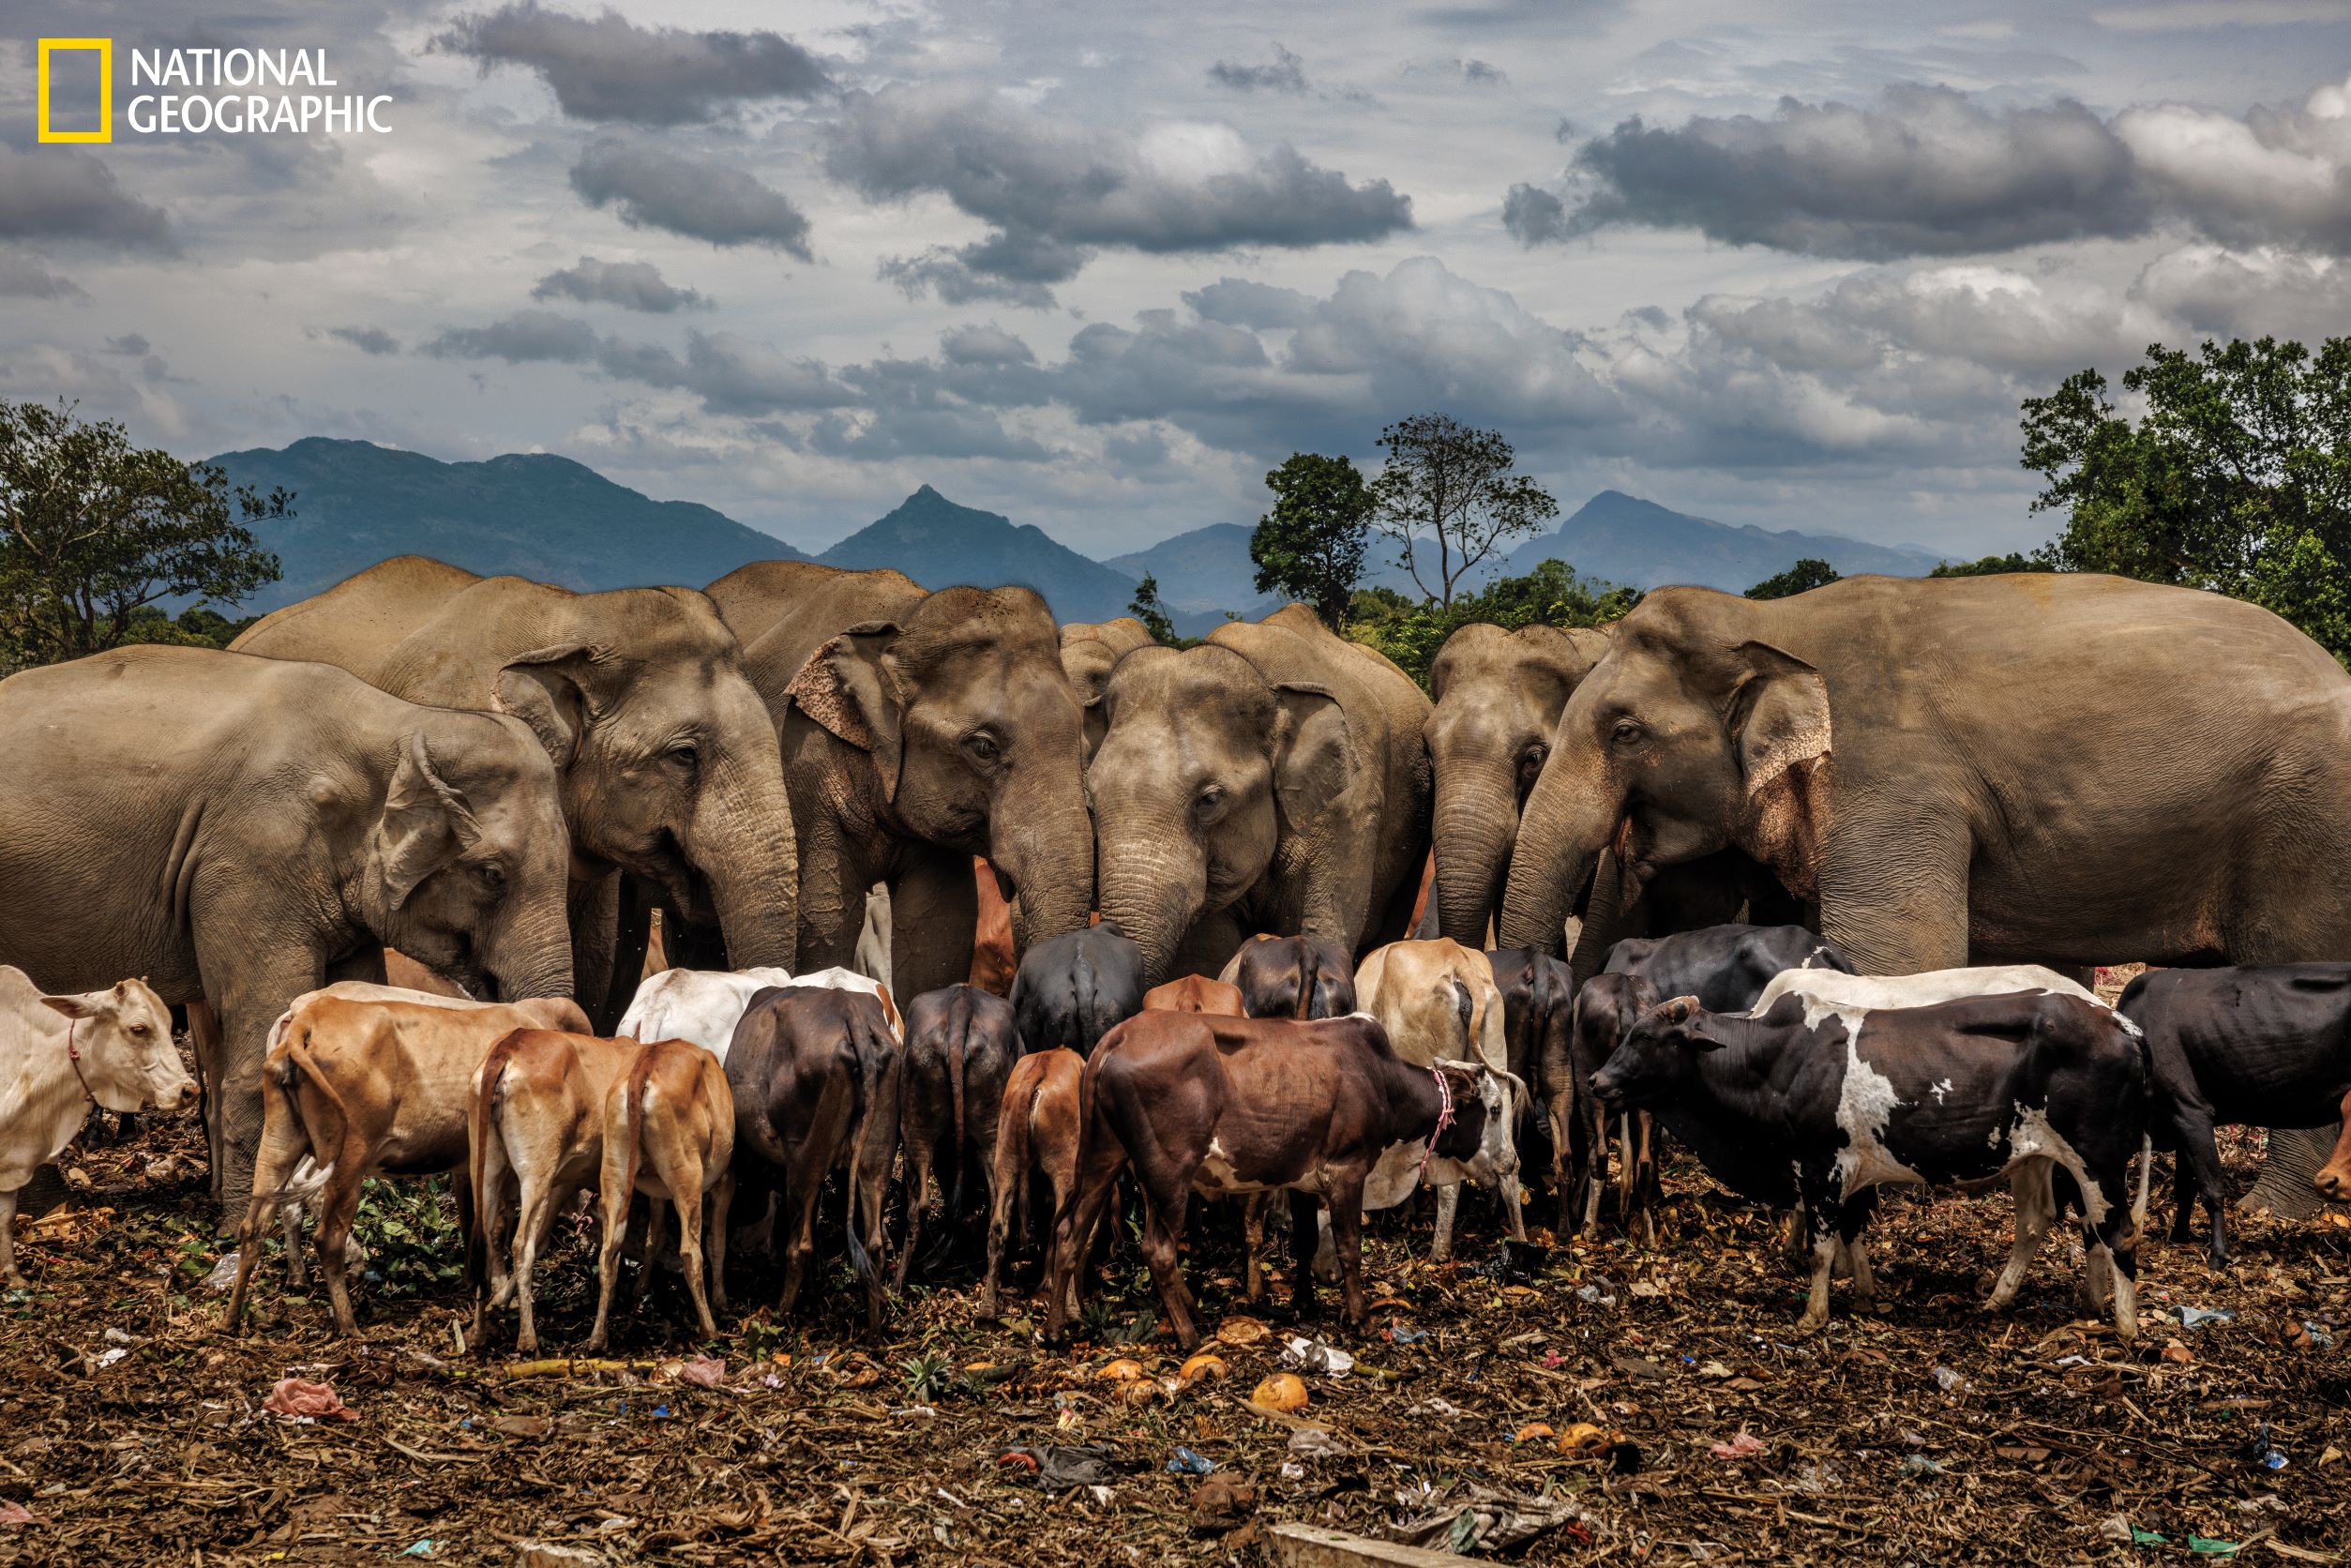 Trash-eating elephants, a lava landscaper, and 8 more of this year’s best NatGeo photos